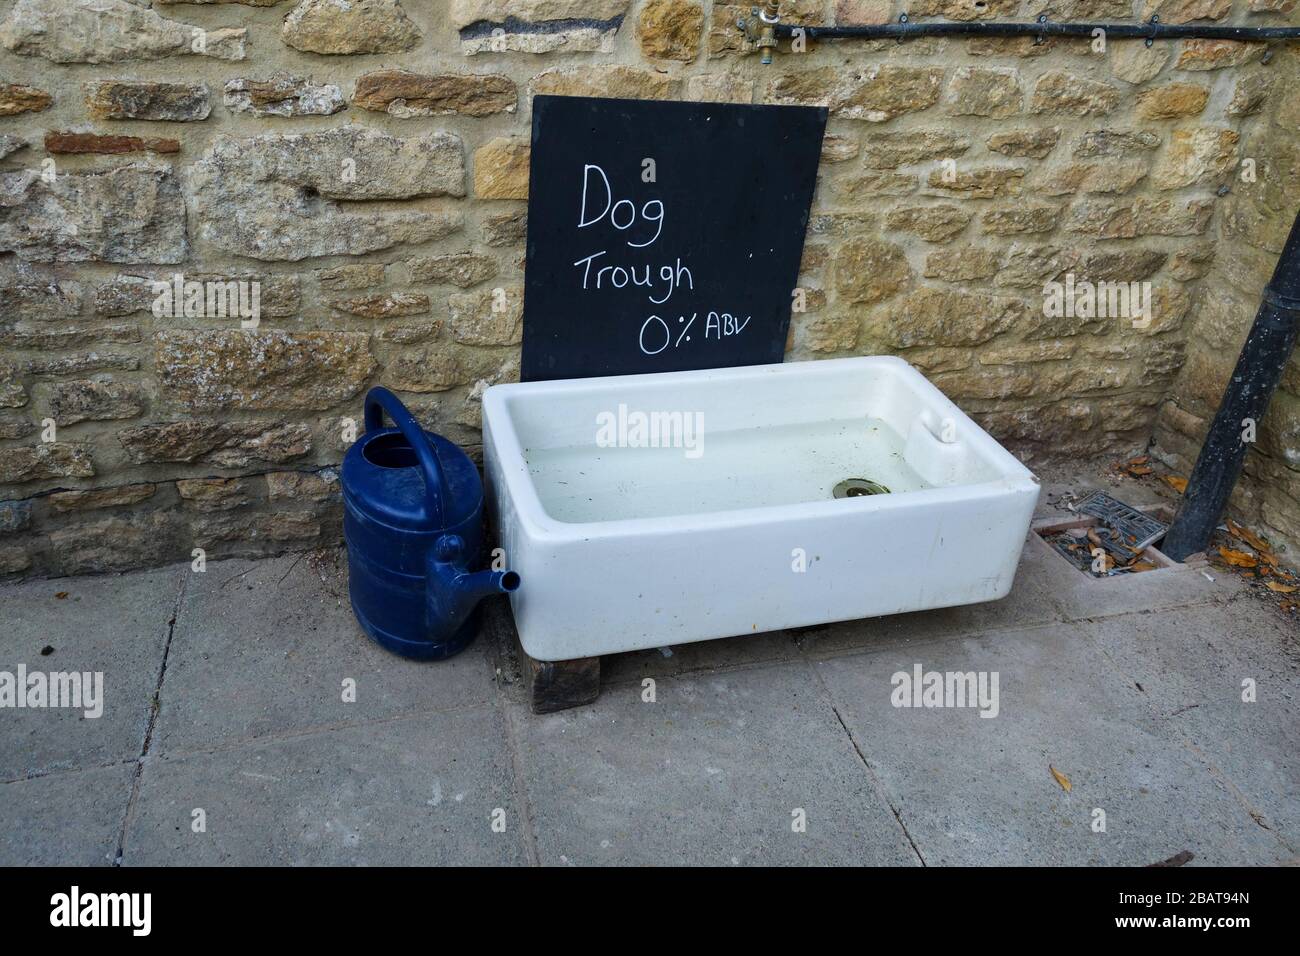 An old kitchen sink filled with water and a sign saying dog trough 0%abv outside a pub, England, UK Stock Photo